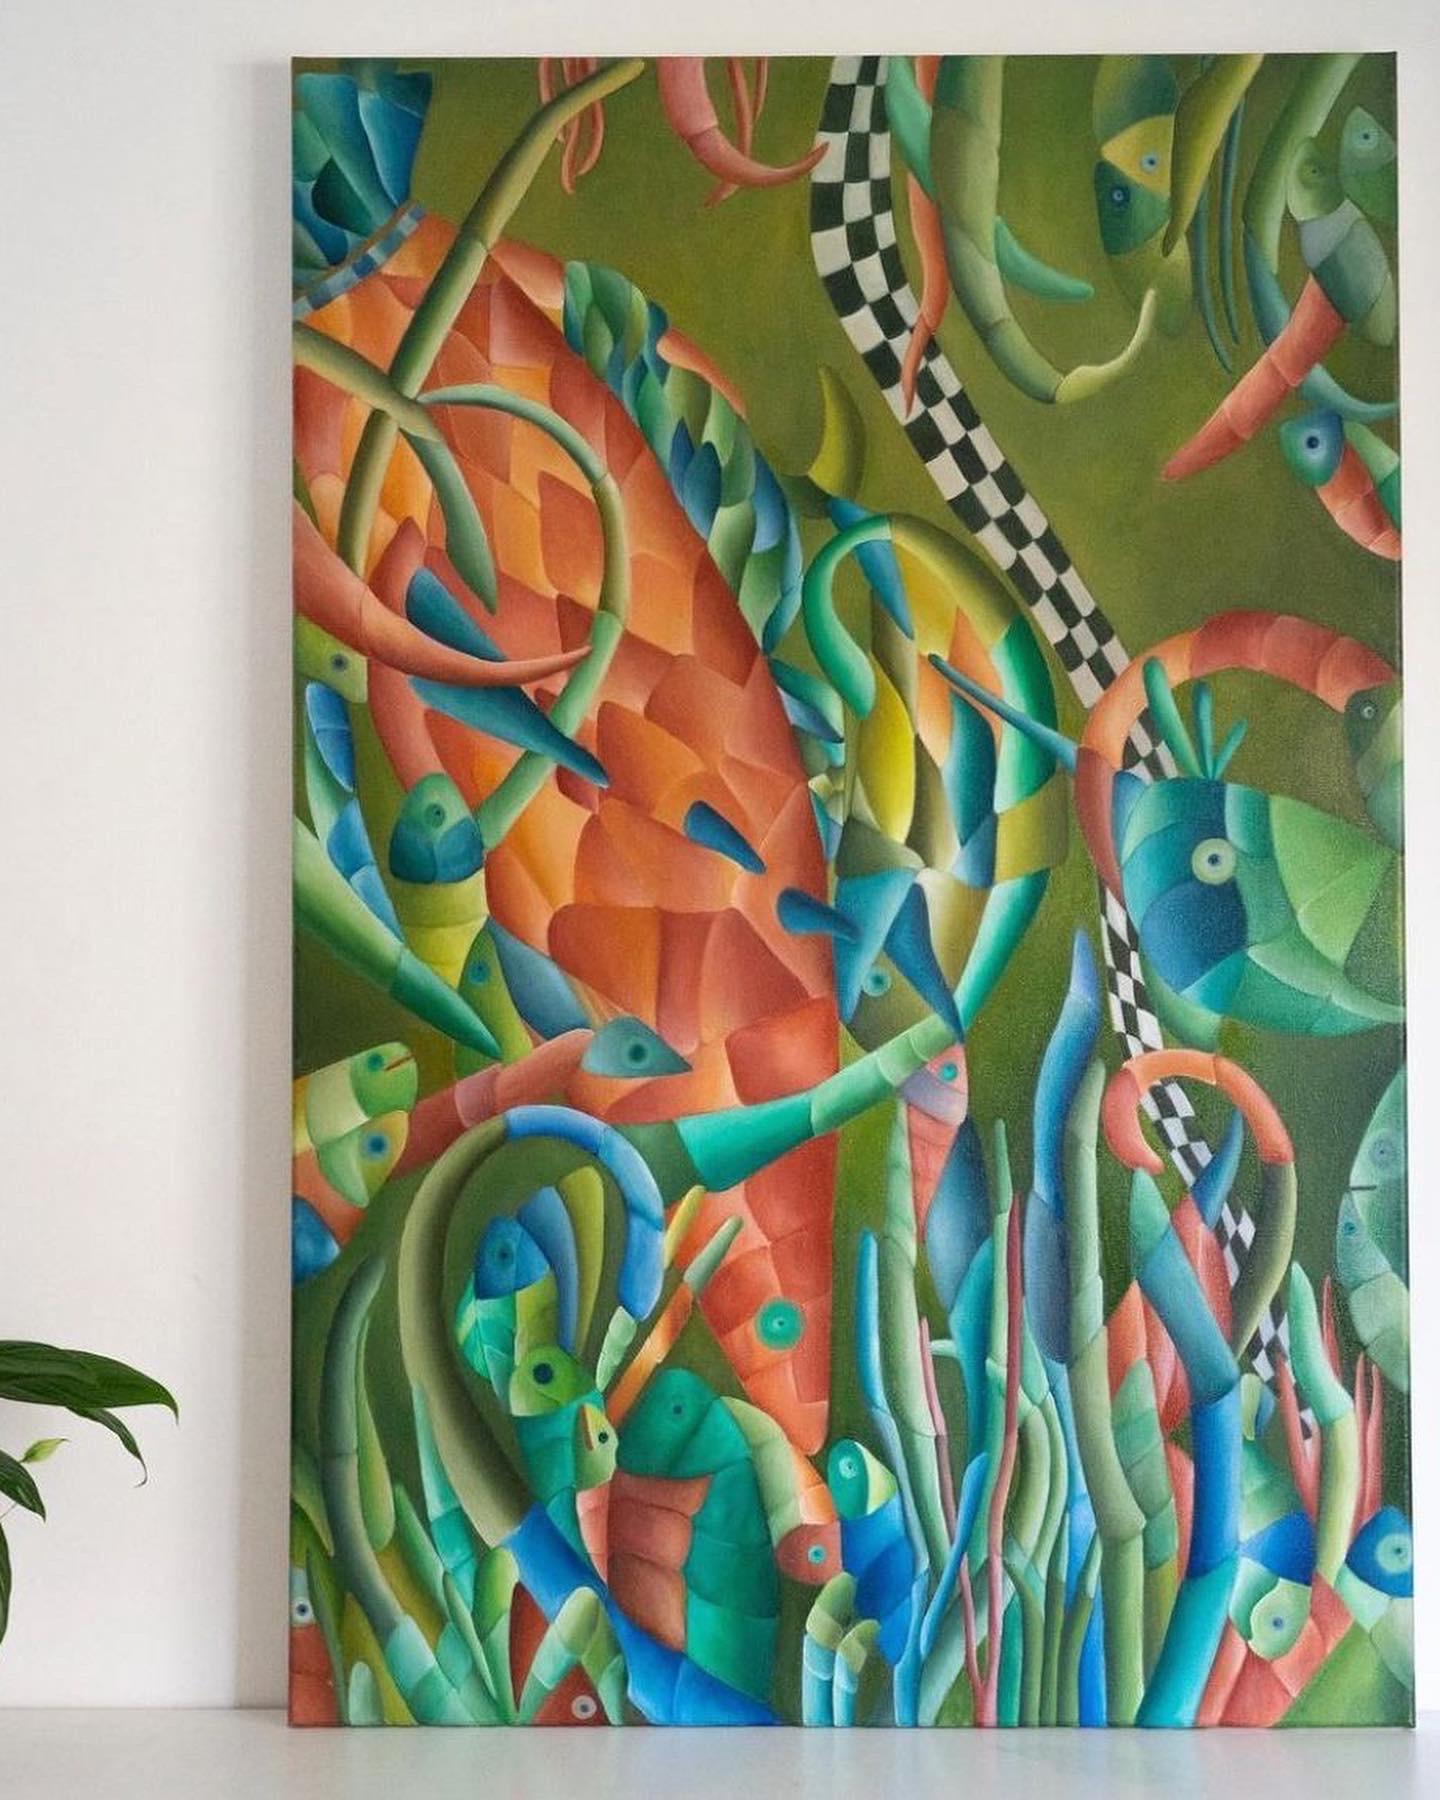 Sea Creatures Frolic - Oil on Canvas Figurative Painting 2022
Artwork is on supported wooden frame. Ready to hang.

